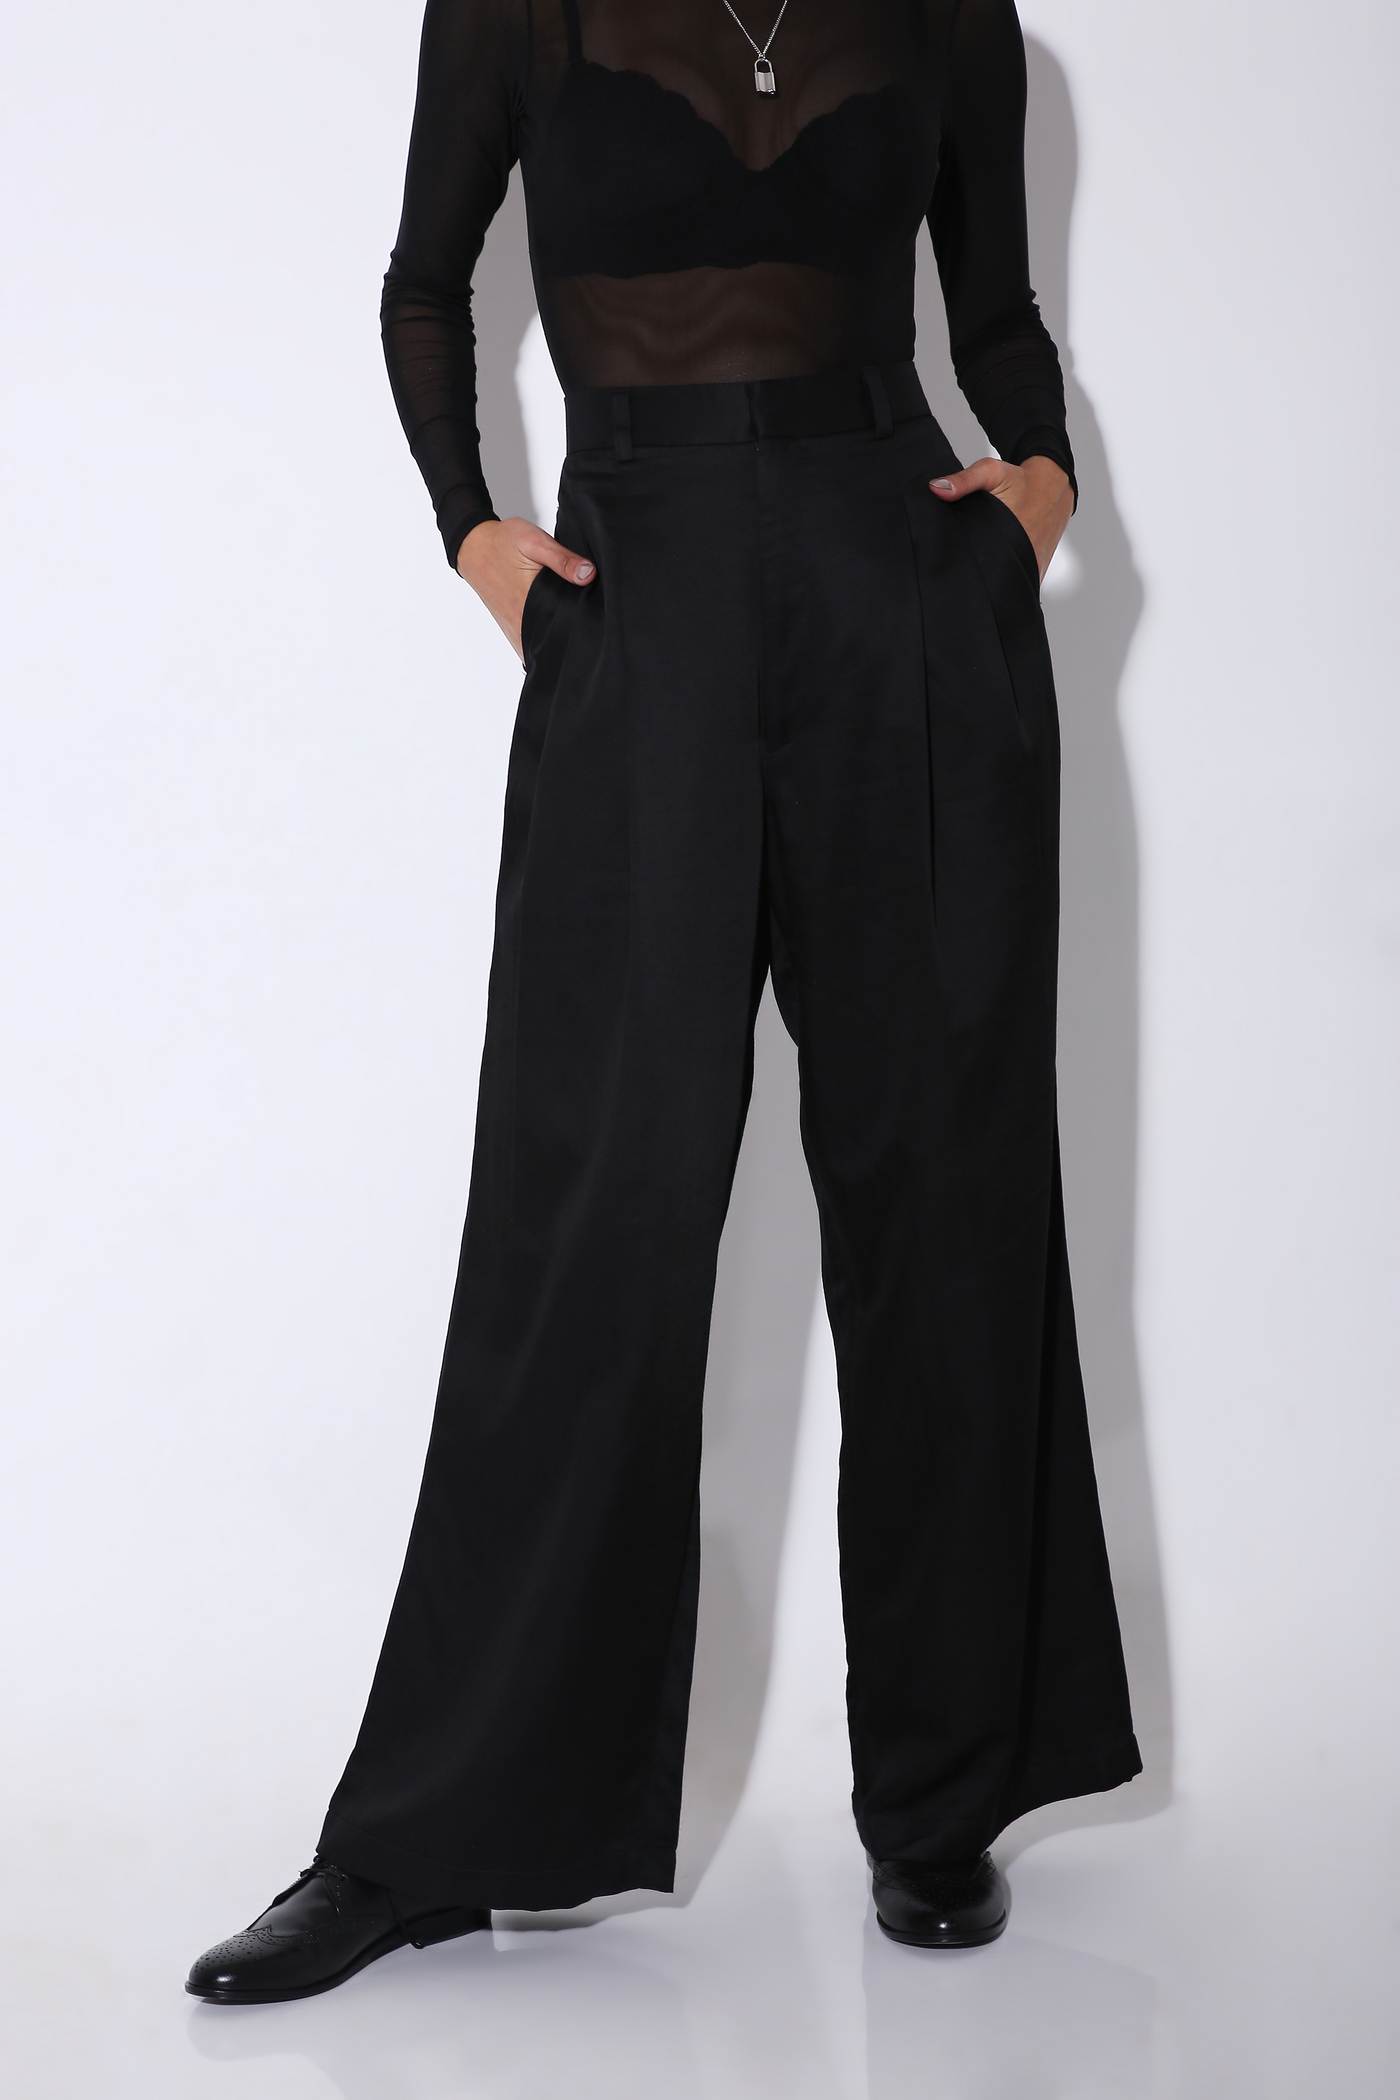 Legs for Days - Wide Legged Pants - Solid-trousers - Monokrom